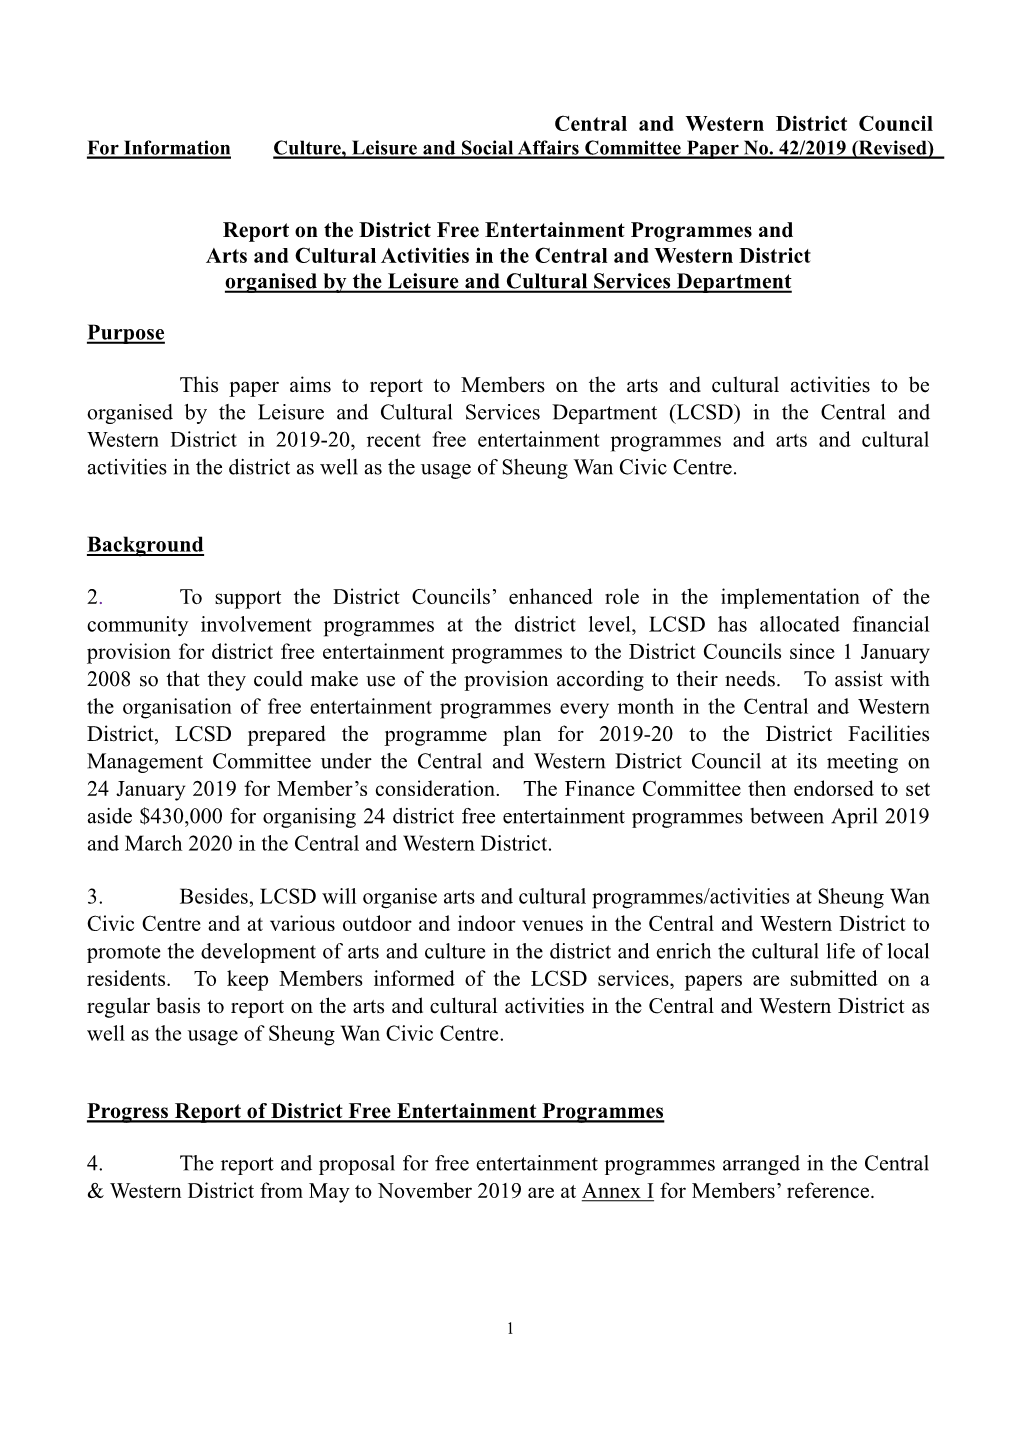 Report on the District Free Entertainment Programmes